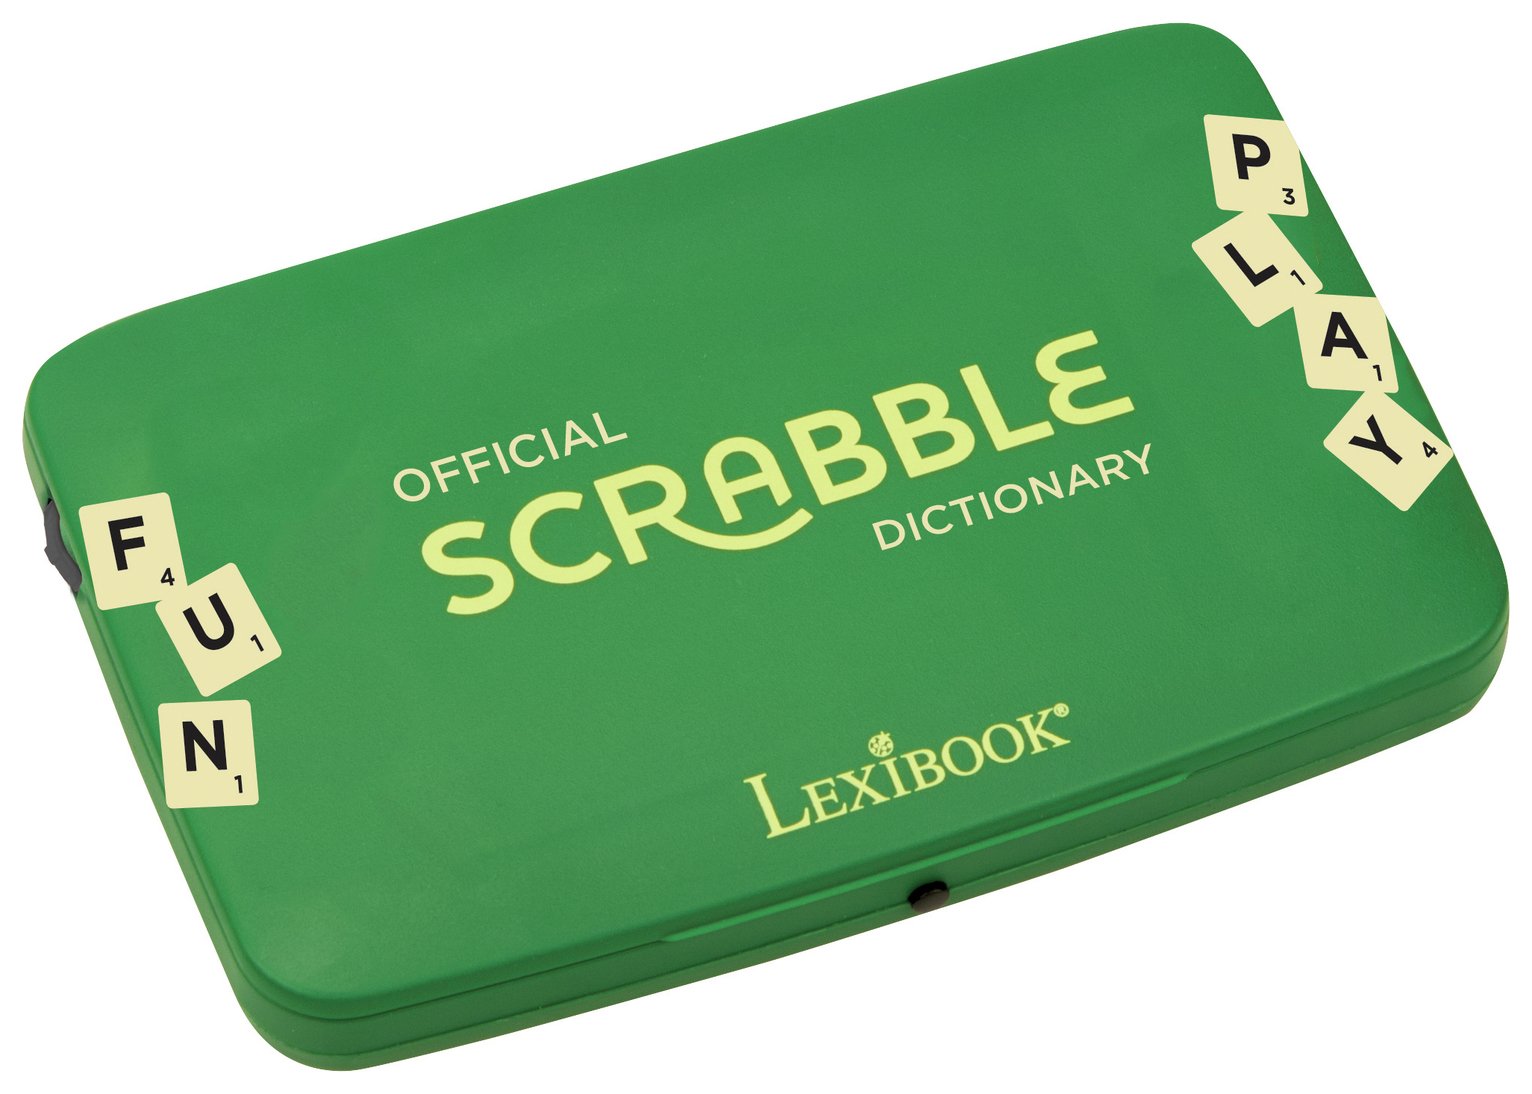 Scrabble Electronic Dictionary Review